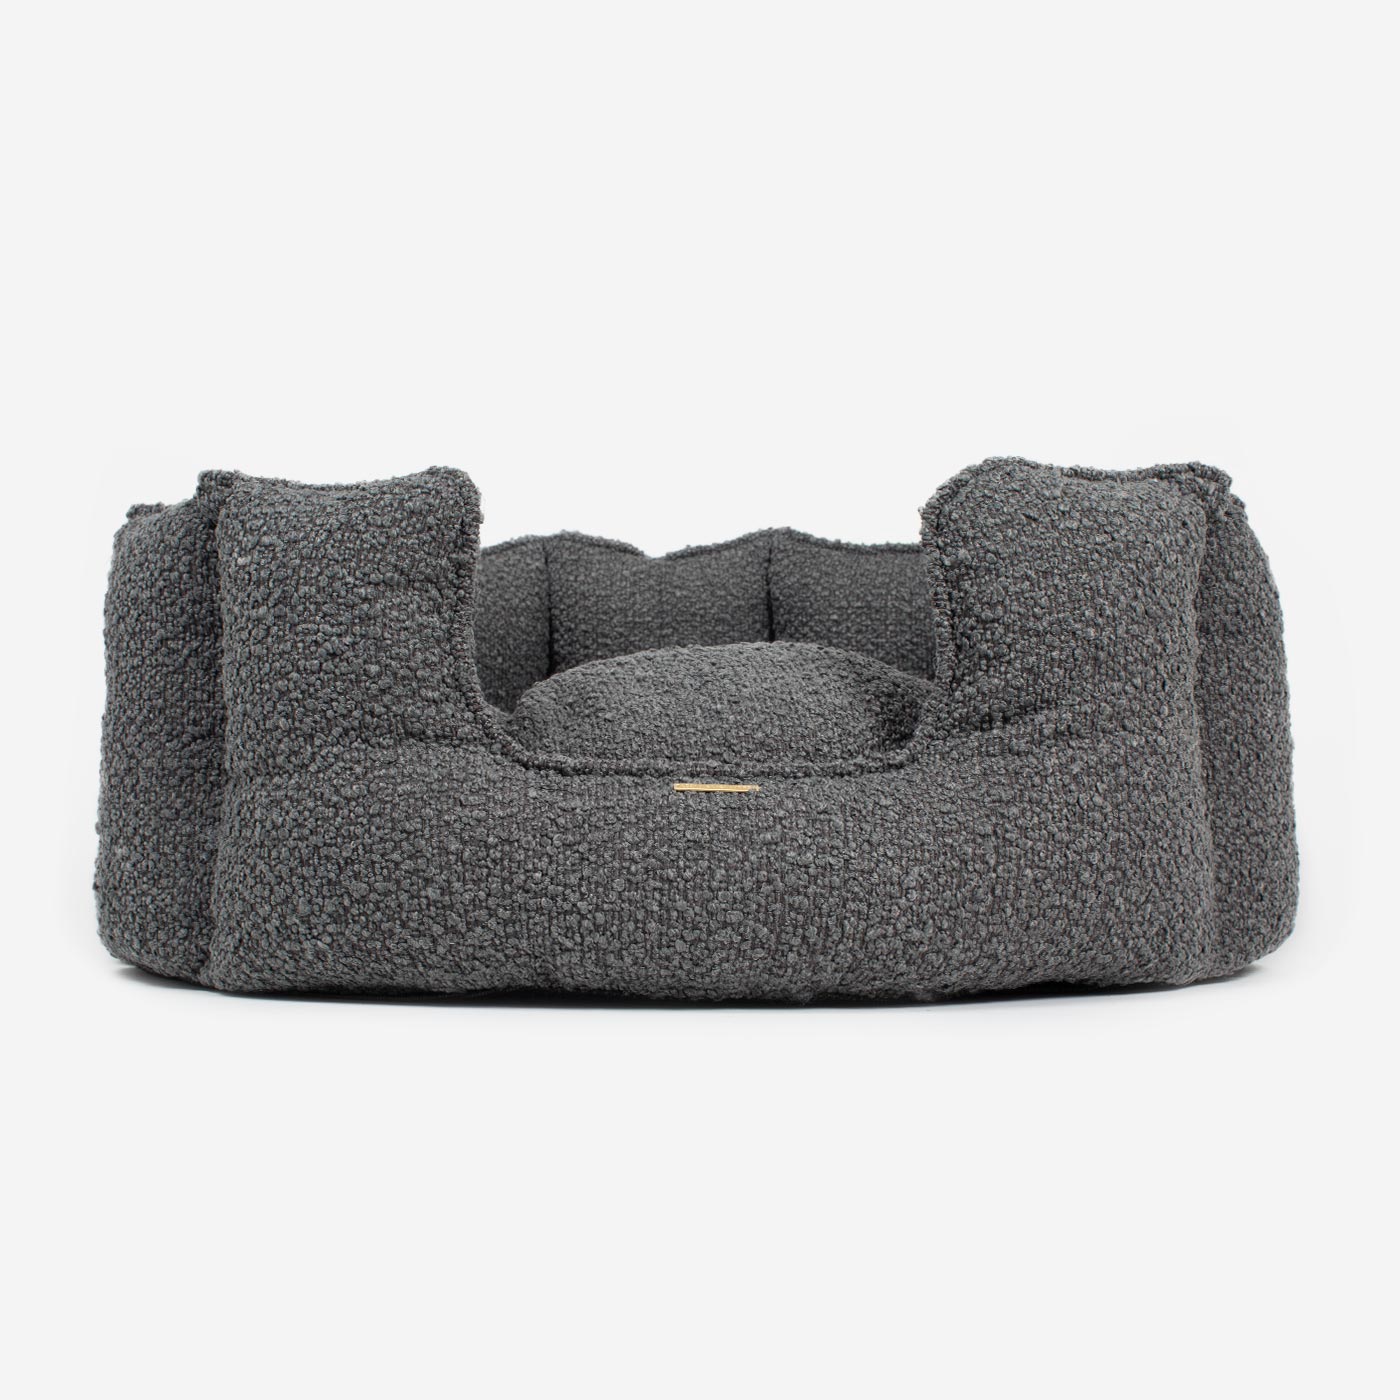 Discover Our Luxurious High Wall Bed For Dogs & Puppies, Featuring inner pillow with plush teddy fleece on one side To Craft The Perfect Dog Bed In Stunning Granite Boucle! Available To Personalise Now at Lords & Labradors    